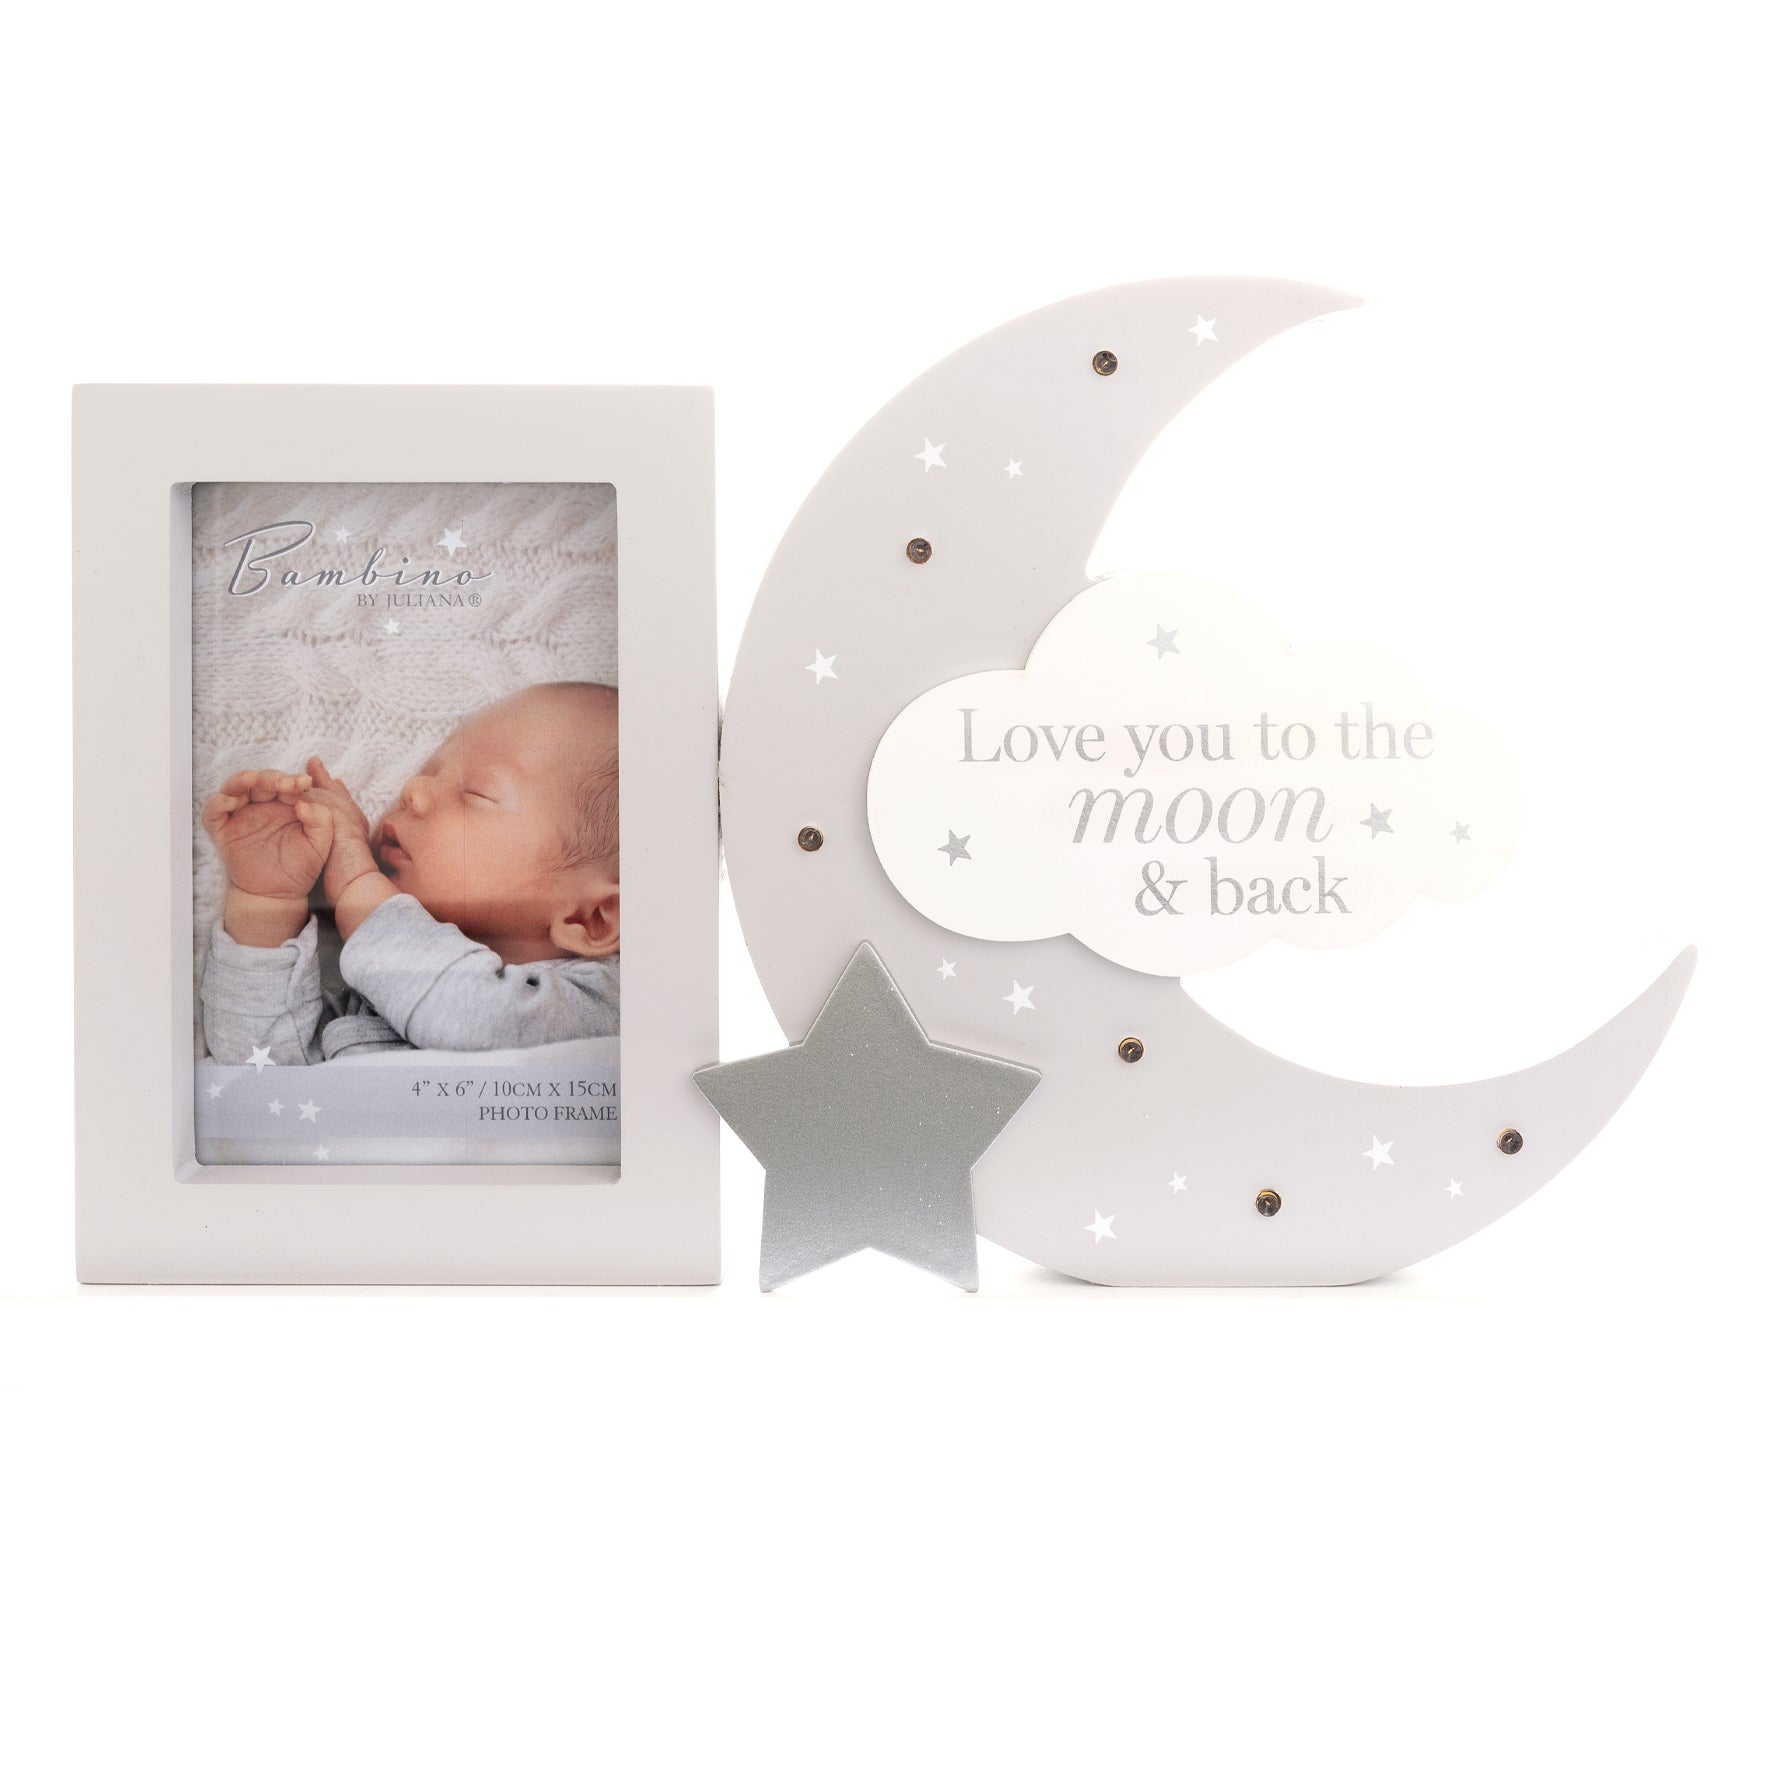 Bambino Light Up Mantel Plaque Frame "Love You to the Moon"